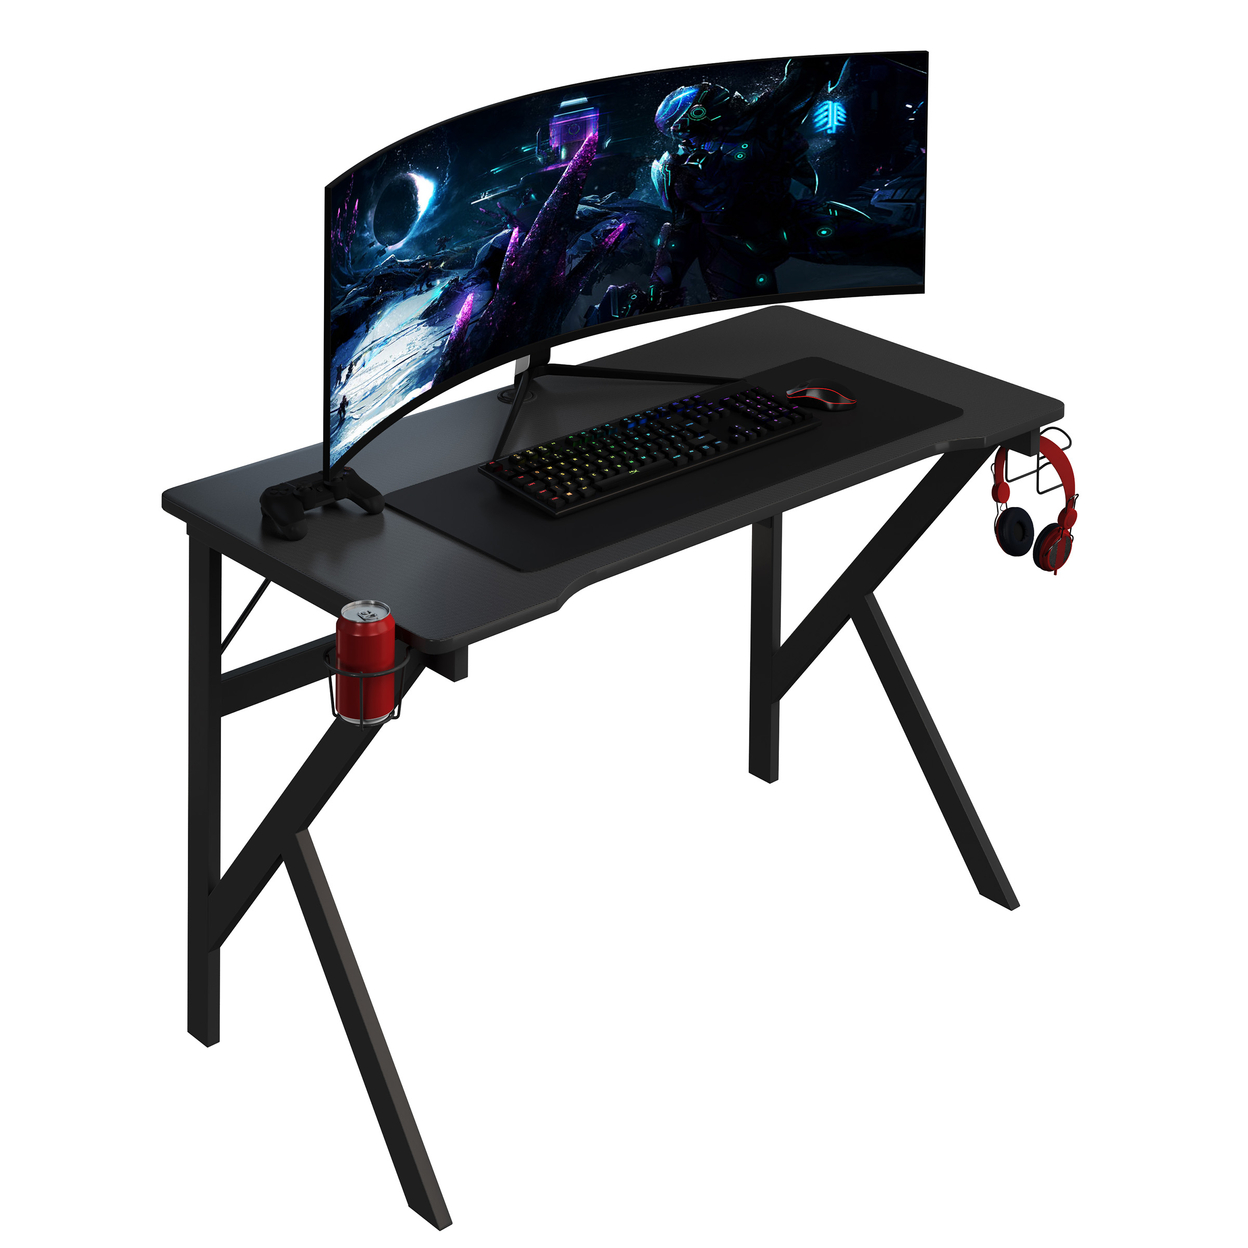 Computer Desk With Cup Holder, Headphones Hanger, K Legs, Cable Mgmt, Black